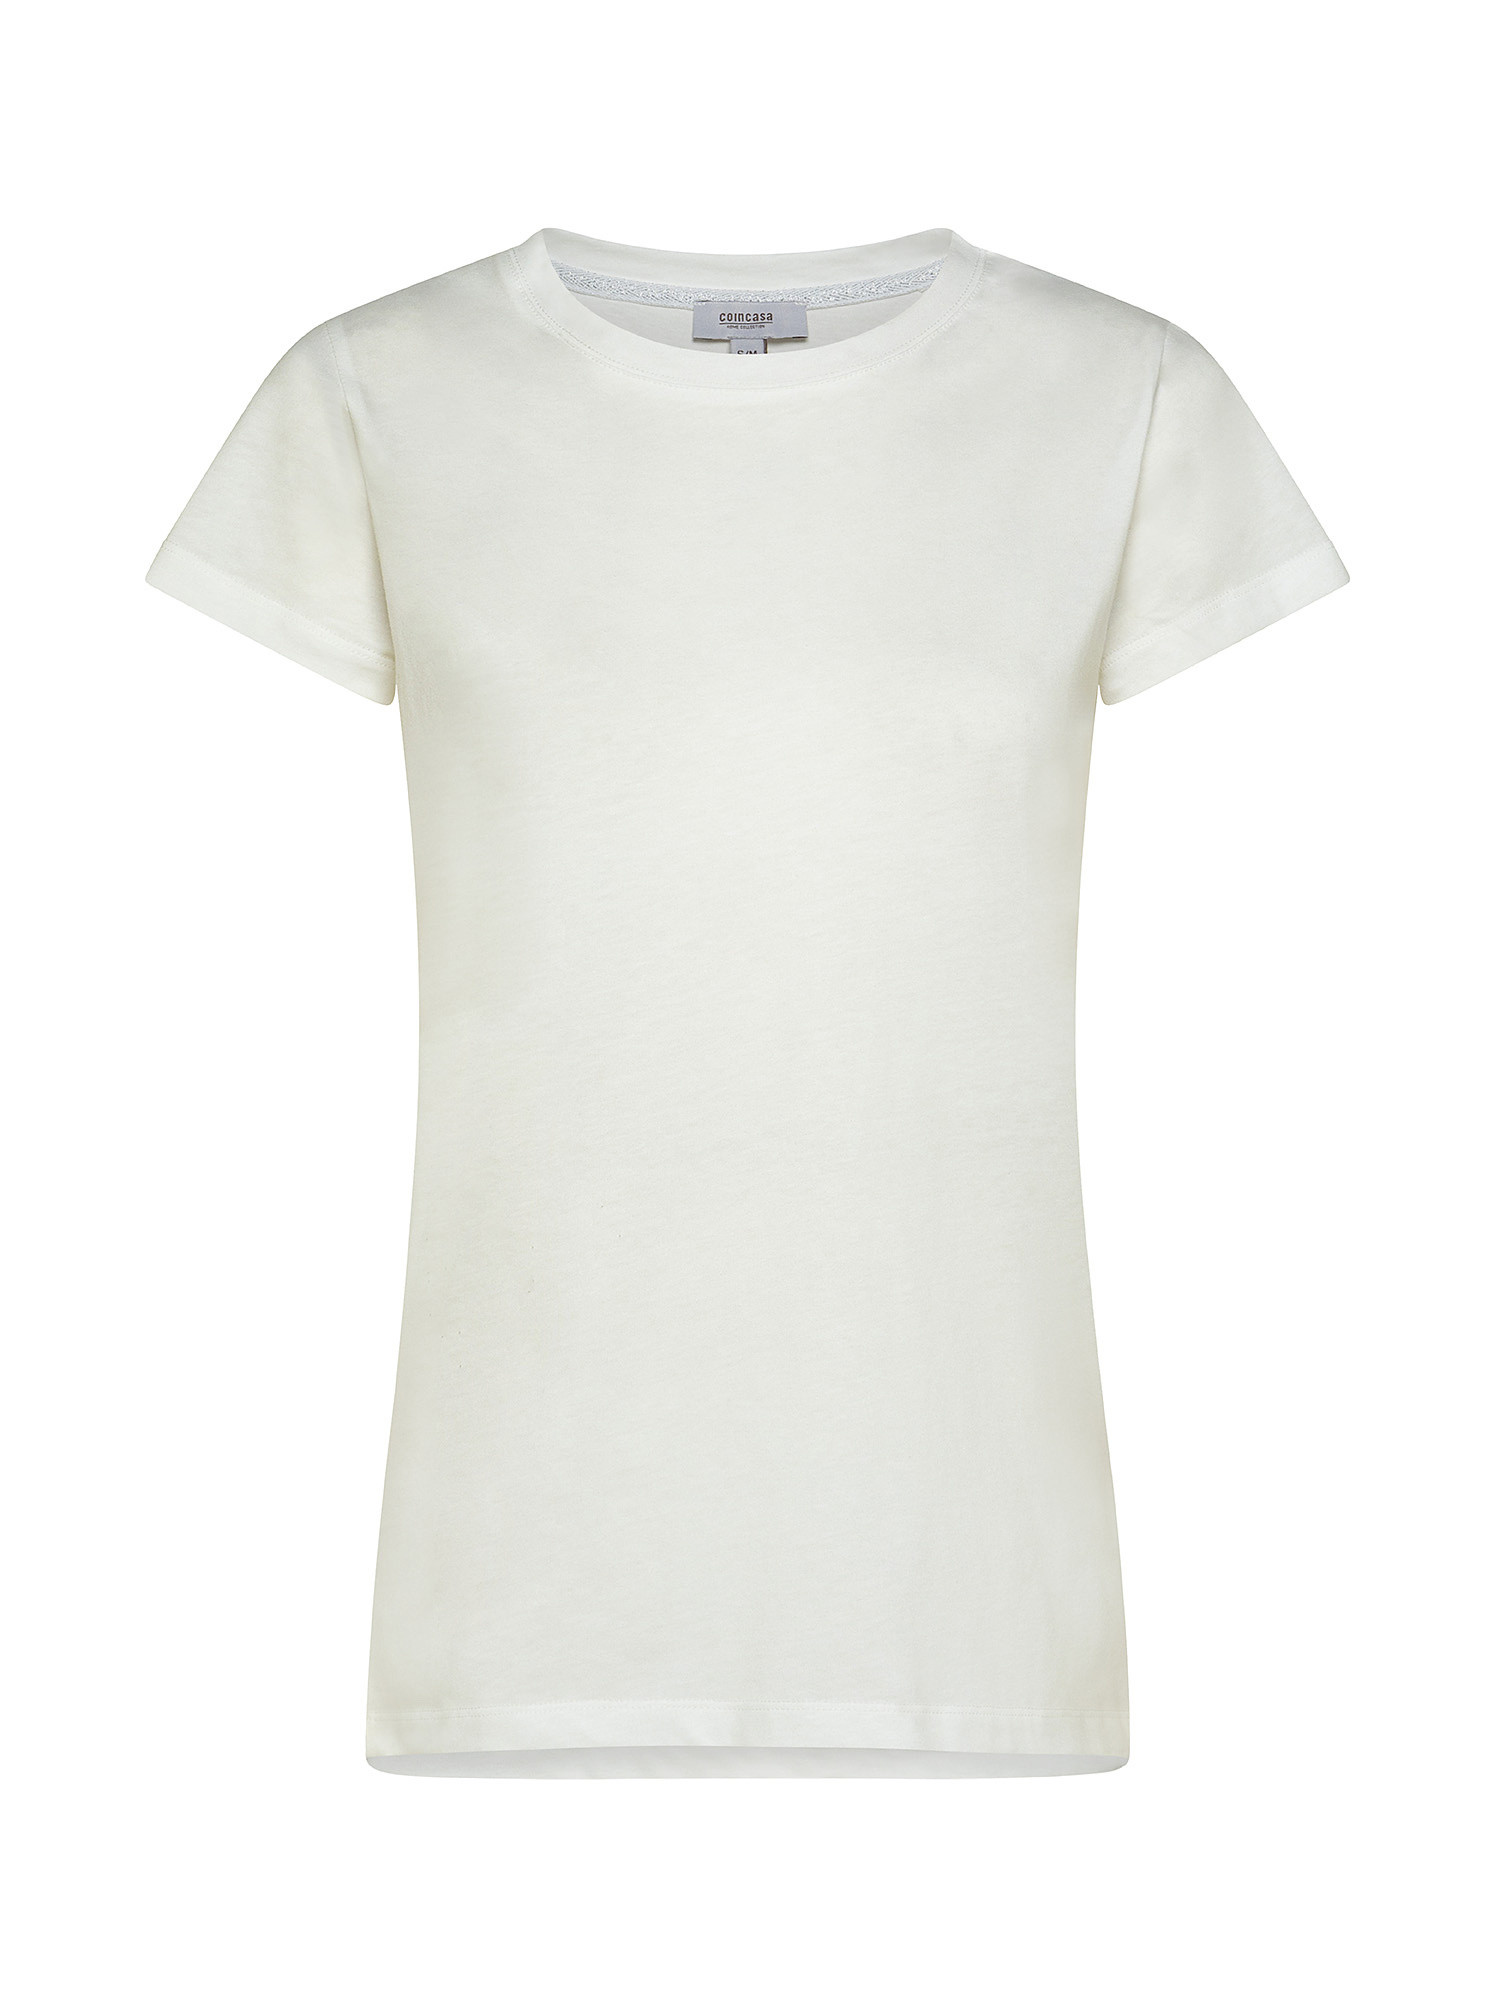 Cotton T-shirt, Off White, large image number 0